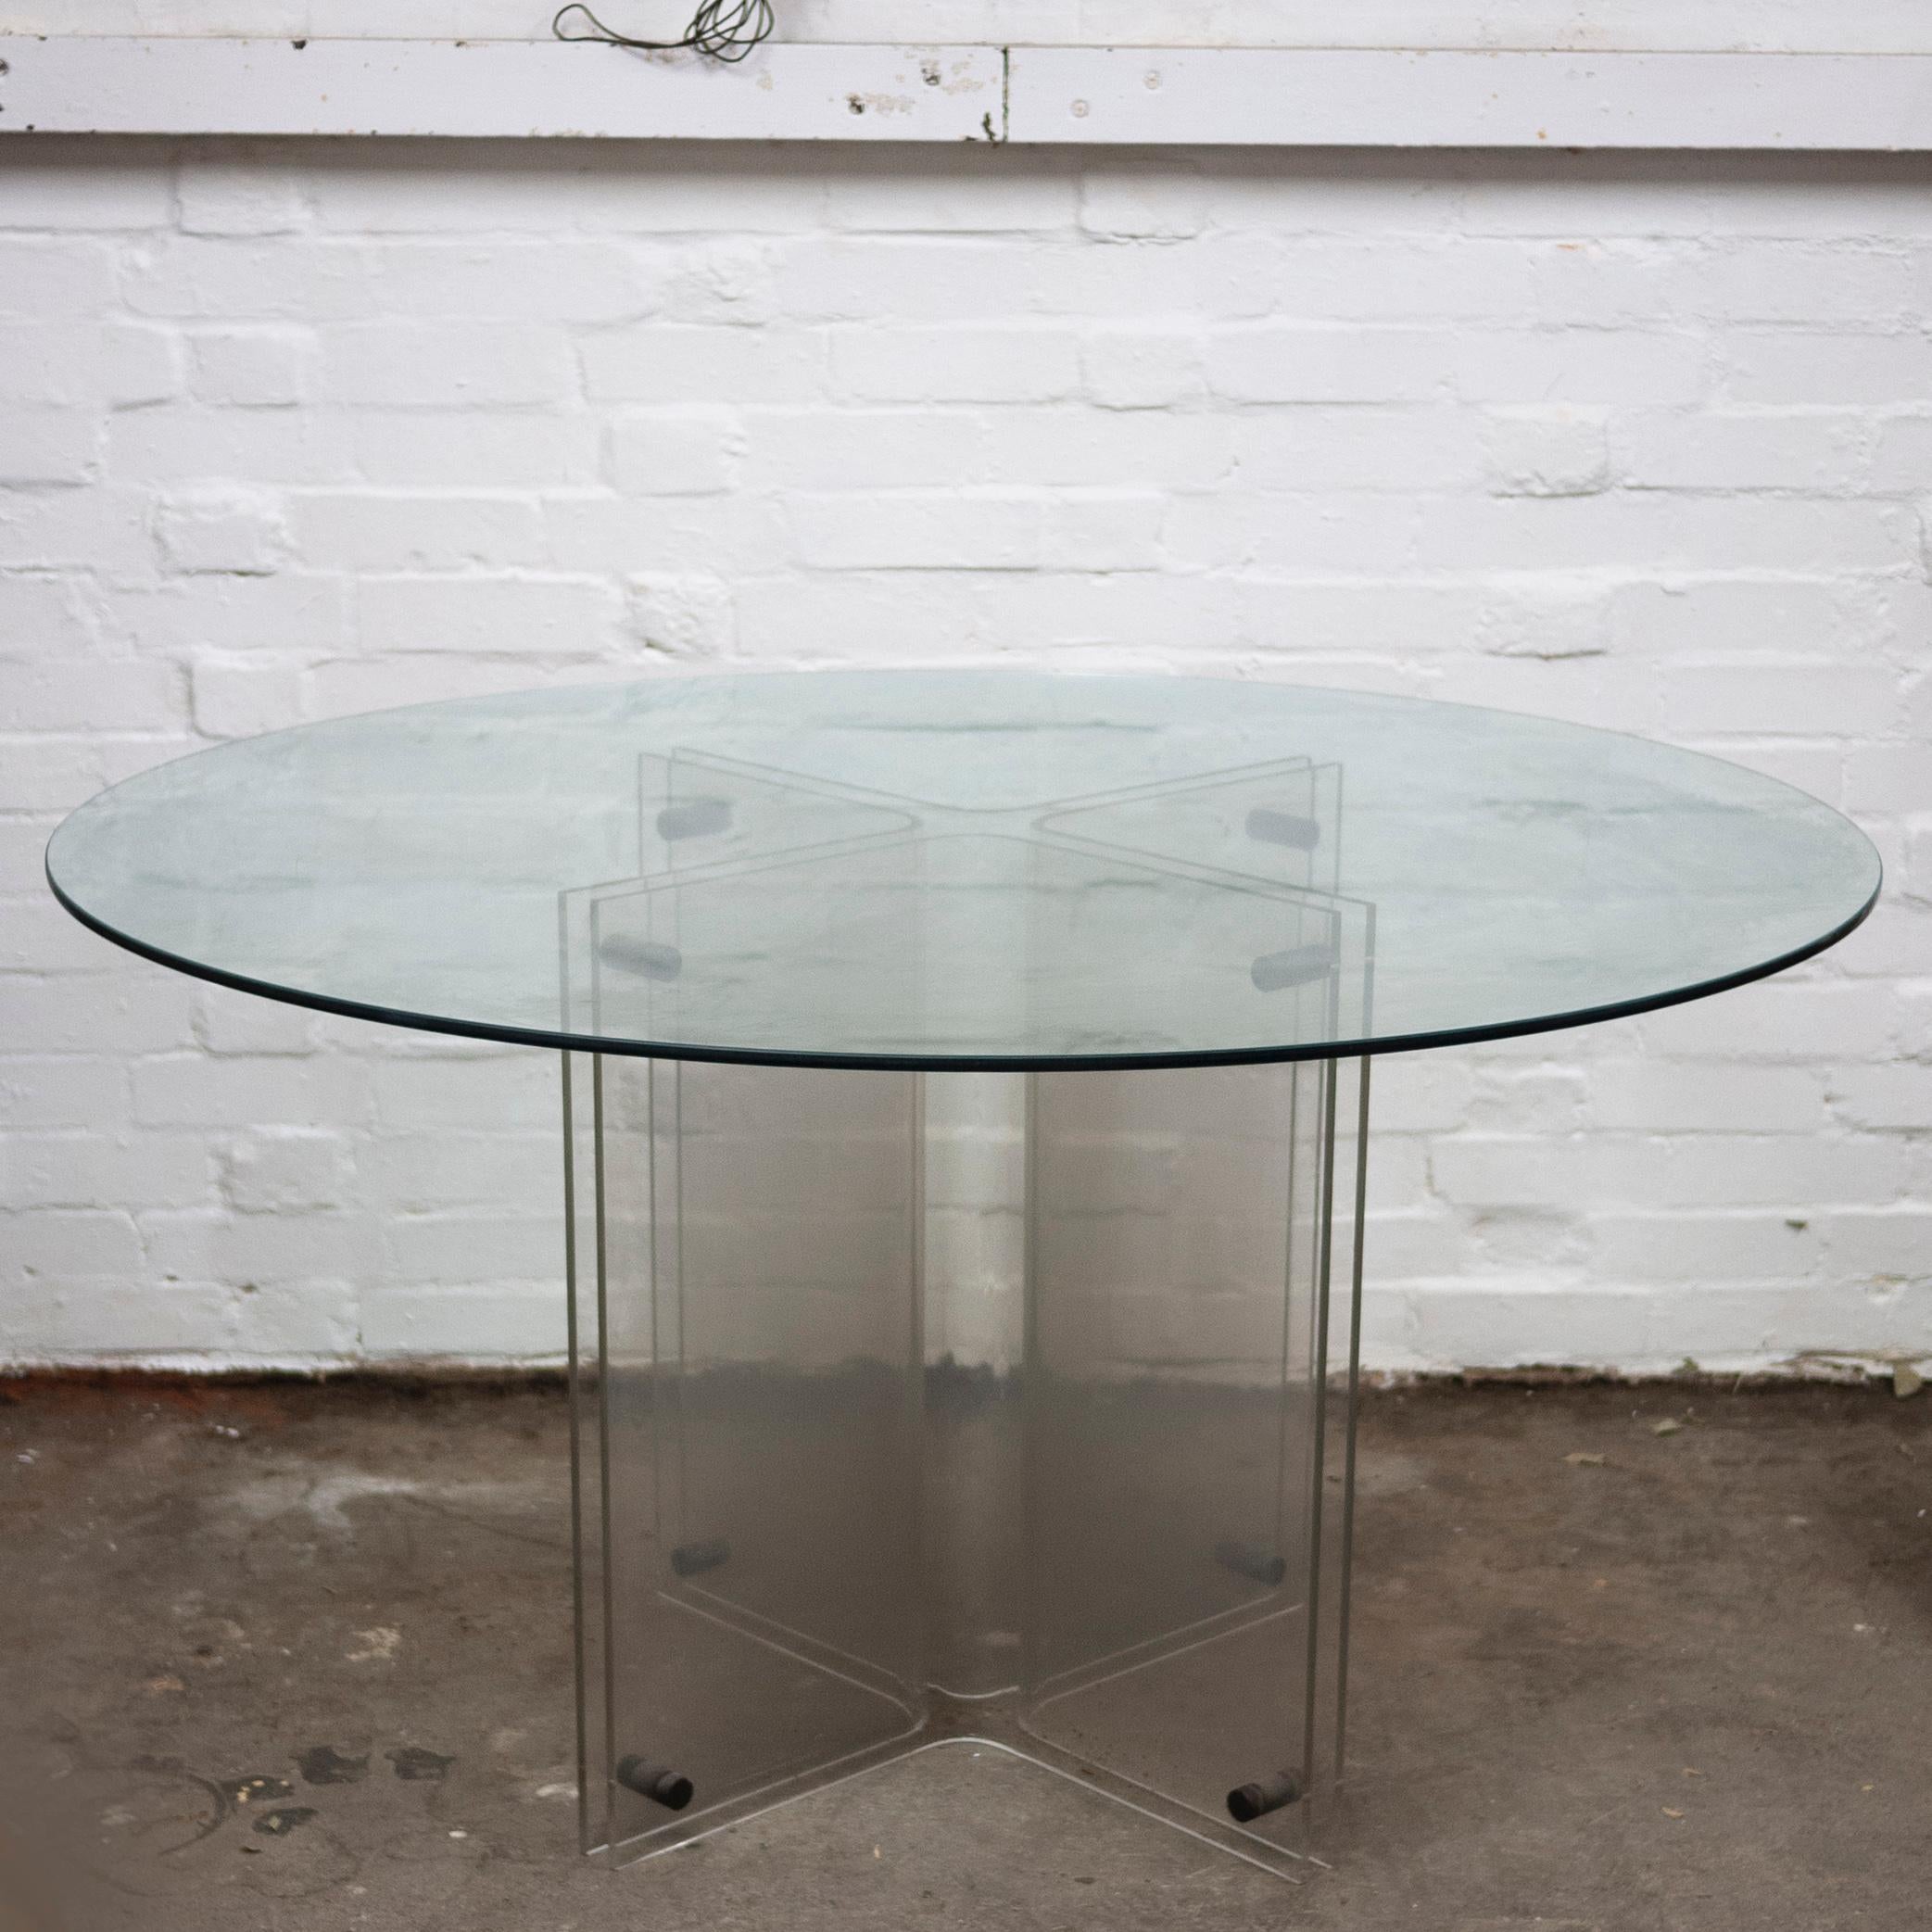 Vintage Hollywood Regency Lucite and Glass Round Dining Table, 1980s For Sale 7